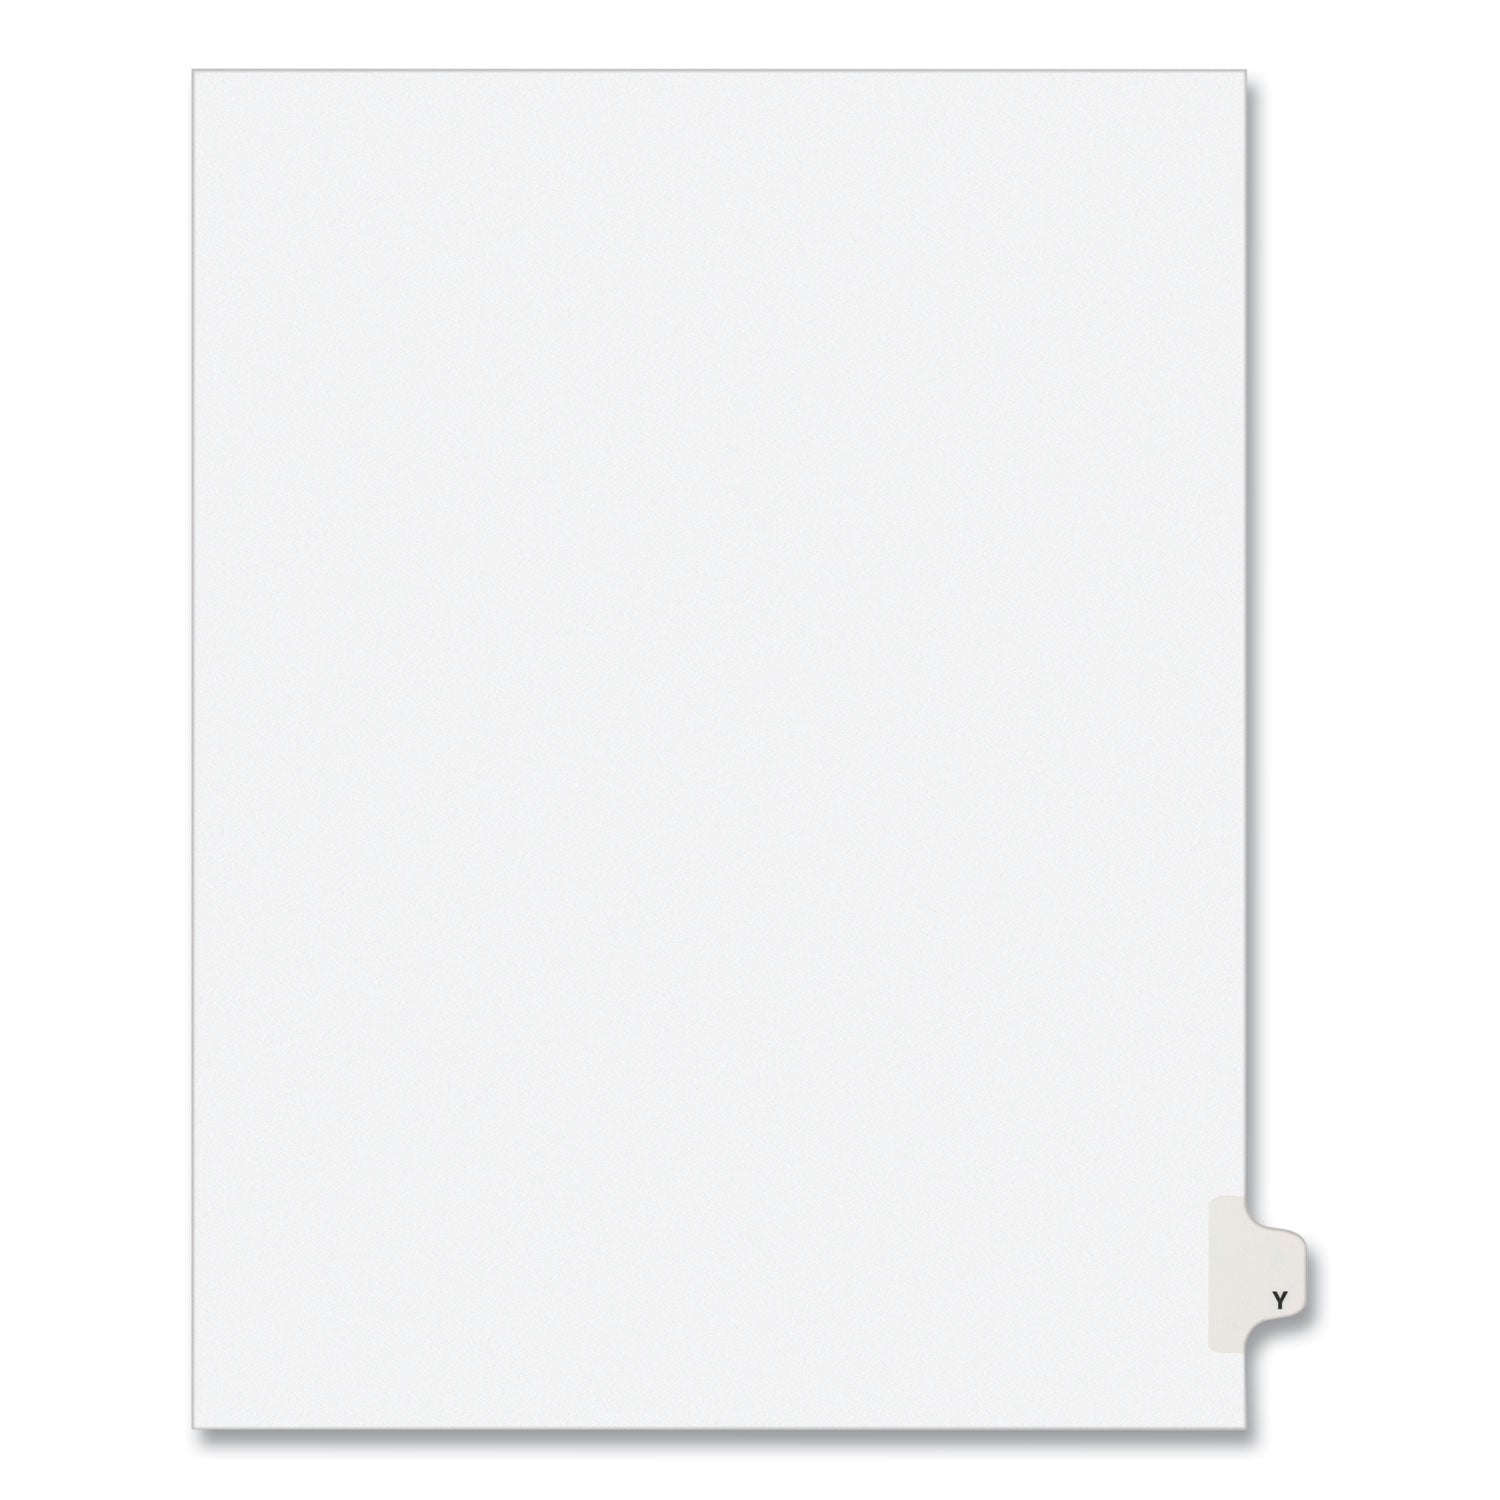 Preprinted Legal Exhibit Side Tab Index Dividers, Avery Style, 26-Tab, Y, 11 x 8.5, White, 25/Pack, (1425) - 